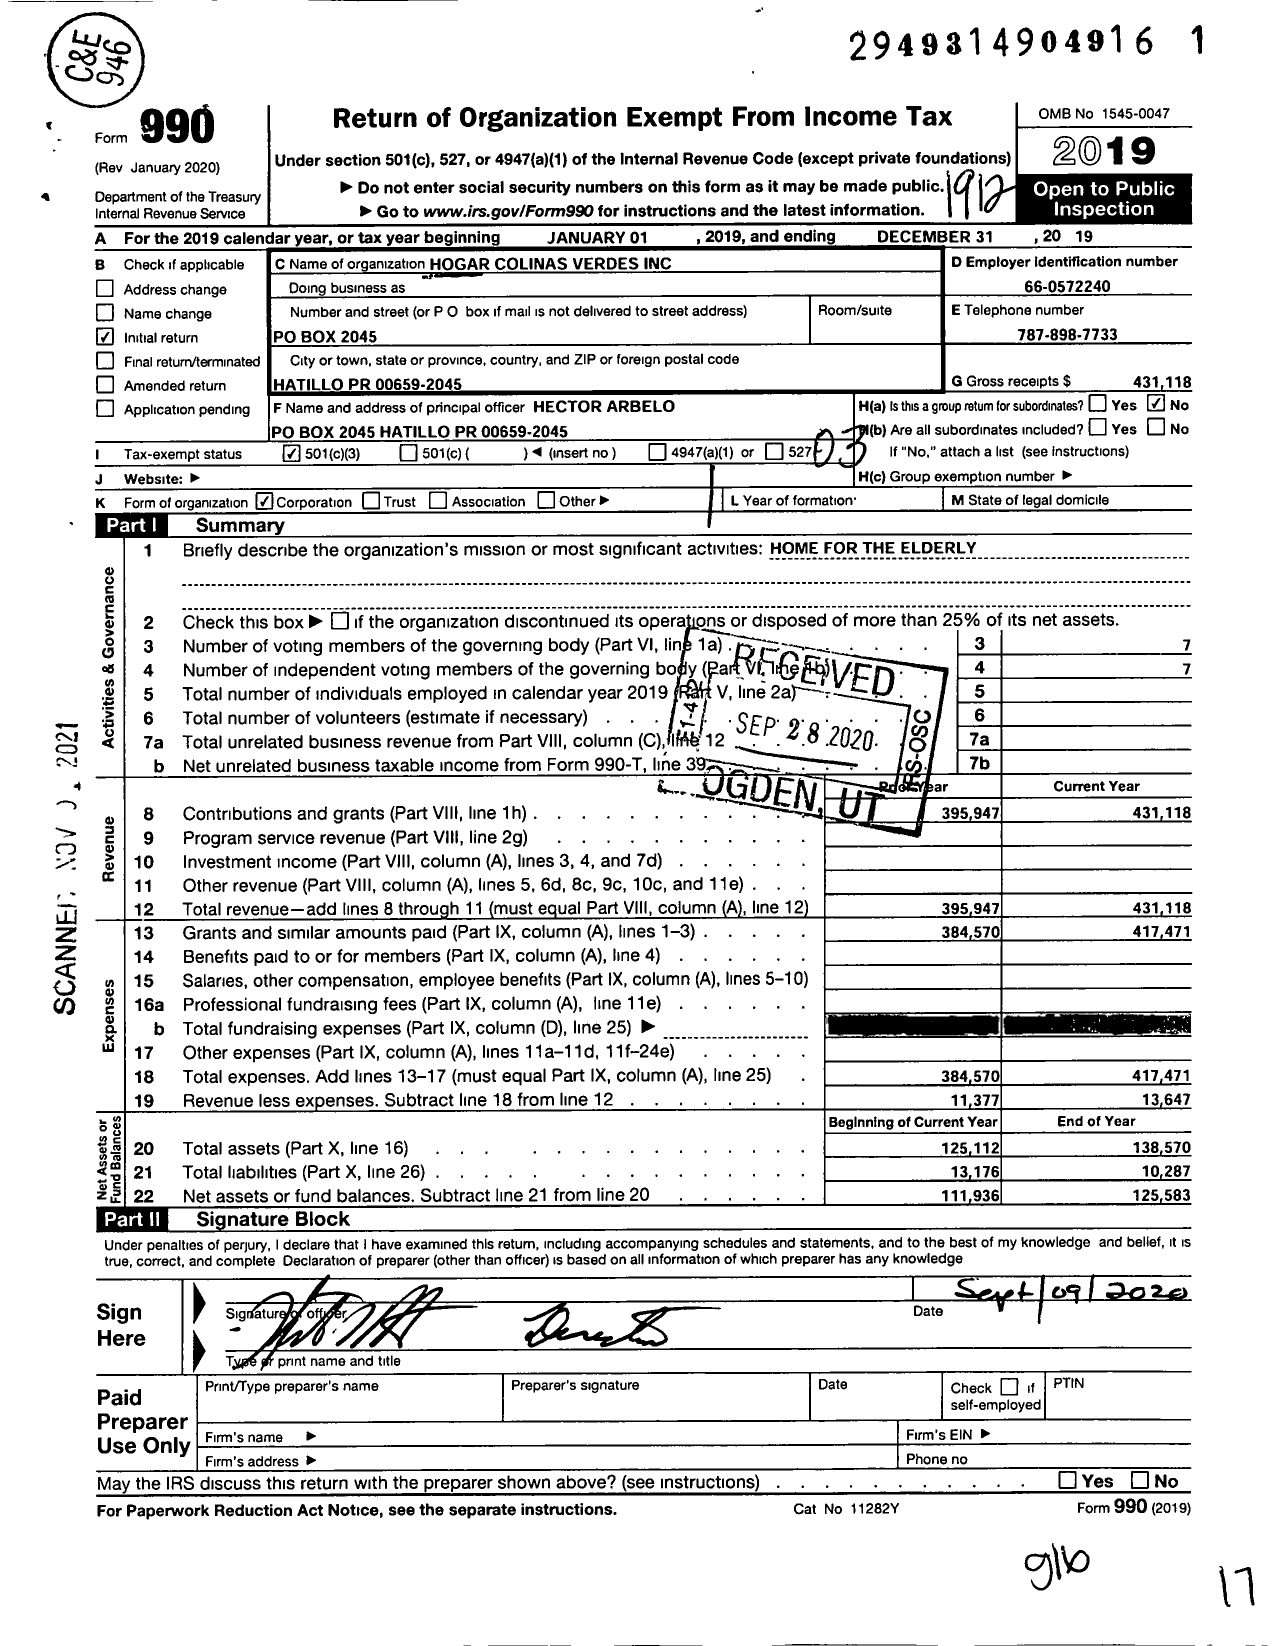 Image of first page of 2019 Form 990 for Hogar Colinas Verdes